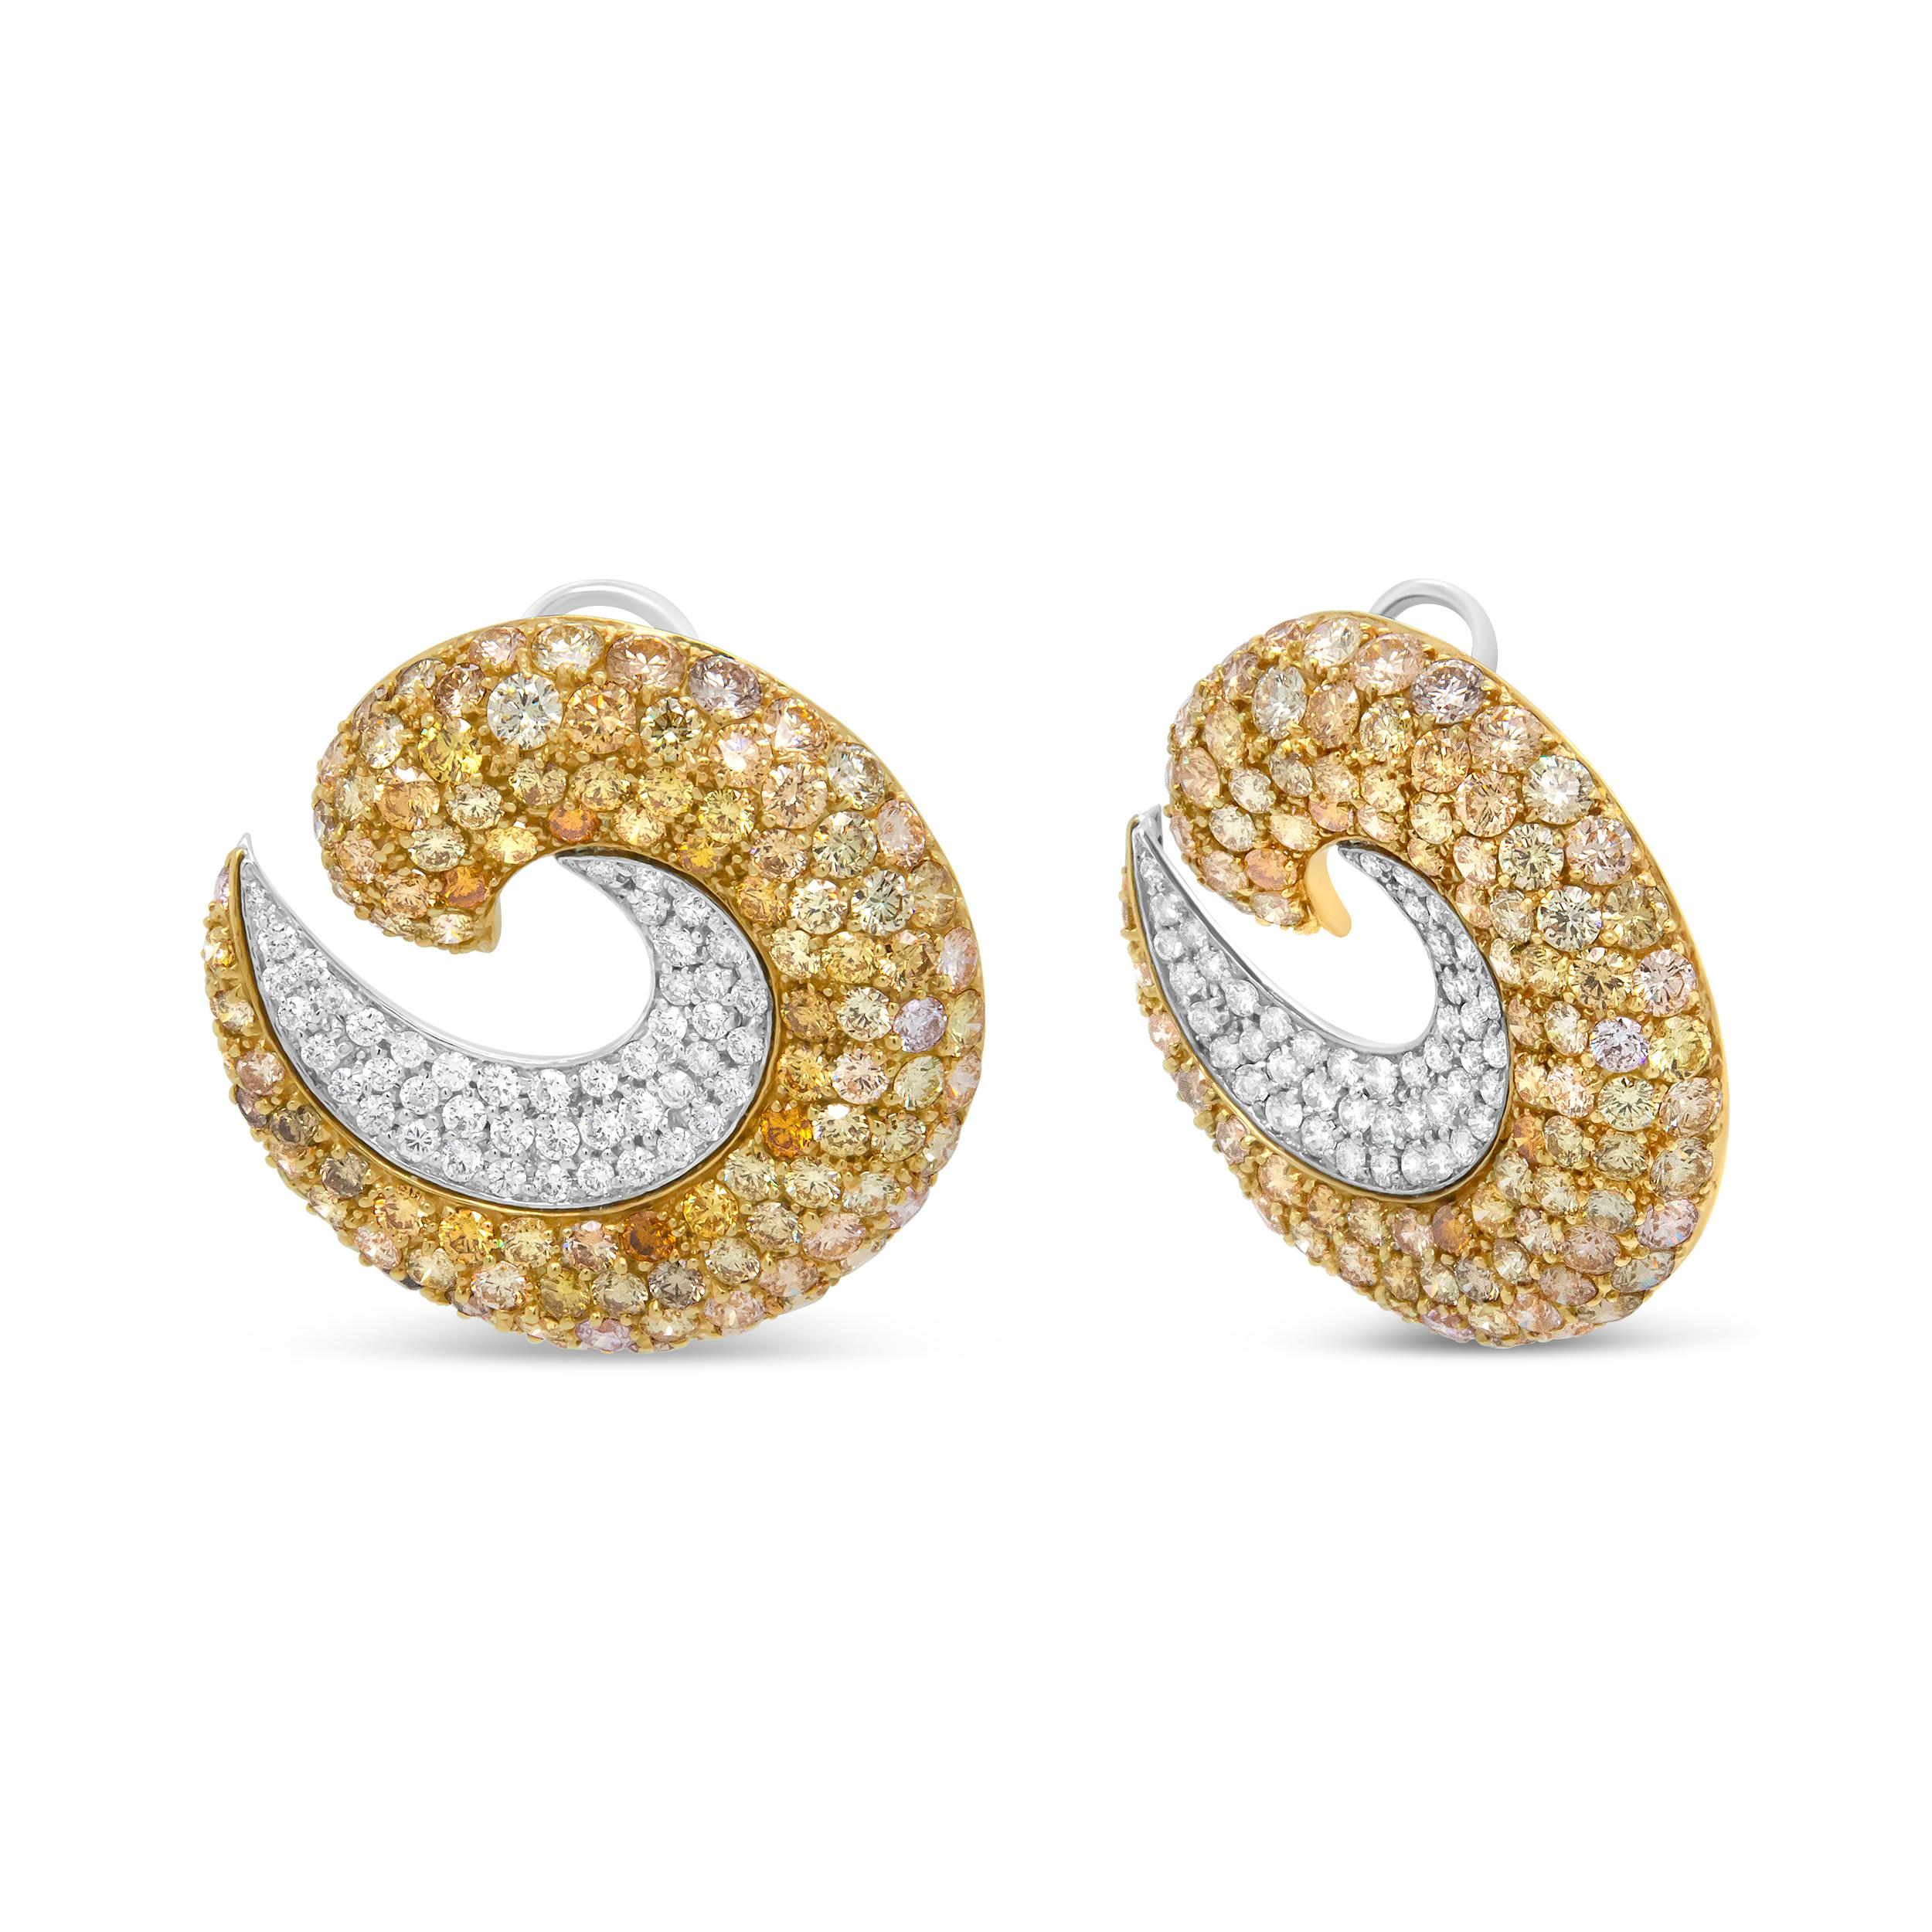 Details are key and play a major role in any true statement piece. This stunning pair of diamond swirl hoop earrings features intricate detailing that is subtle in its timeless elegance and bold in its unique approach. The graceful spiraling